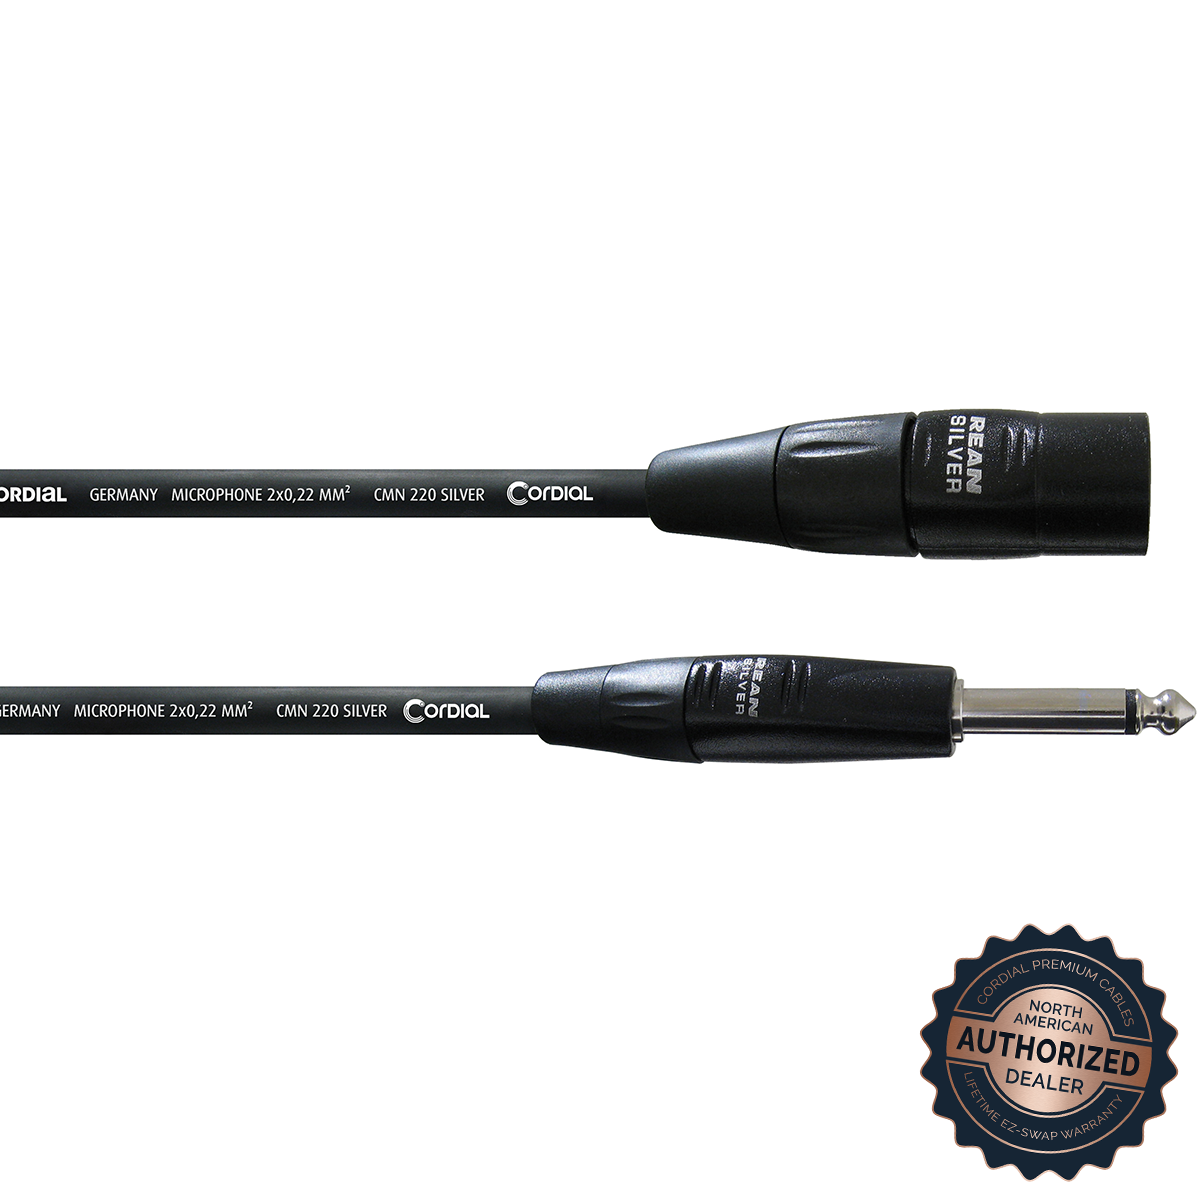 Cordial Balanced Microphone Cable; 25ft.

SKU: CIM 7.5 MP

XLR Male to 1/4" TS Male; 25ft. 